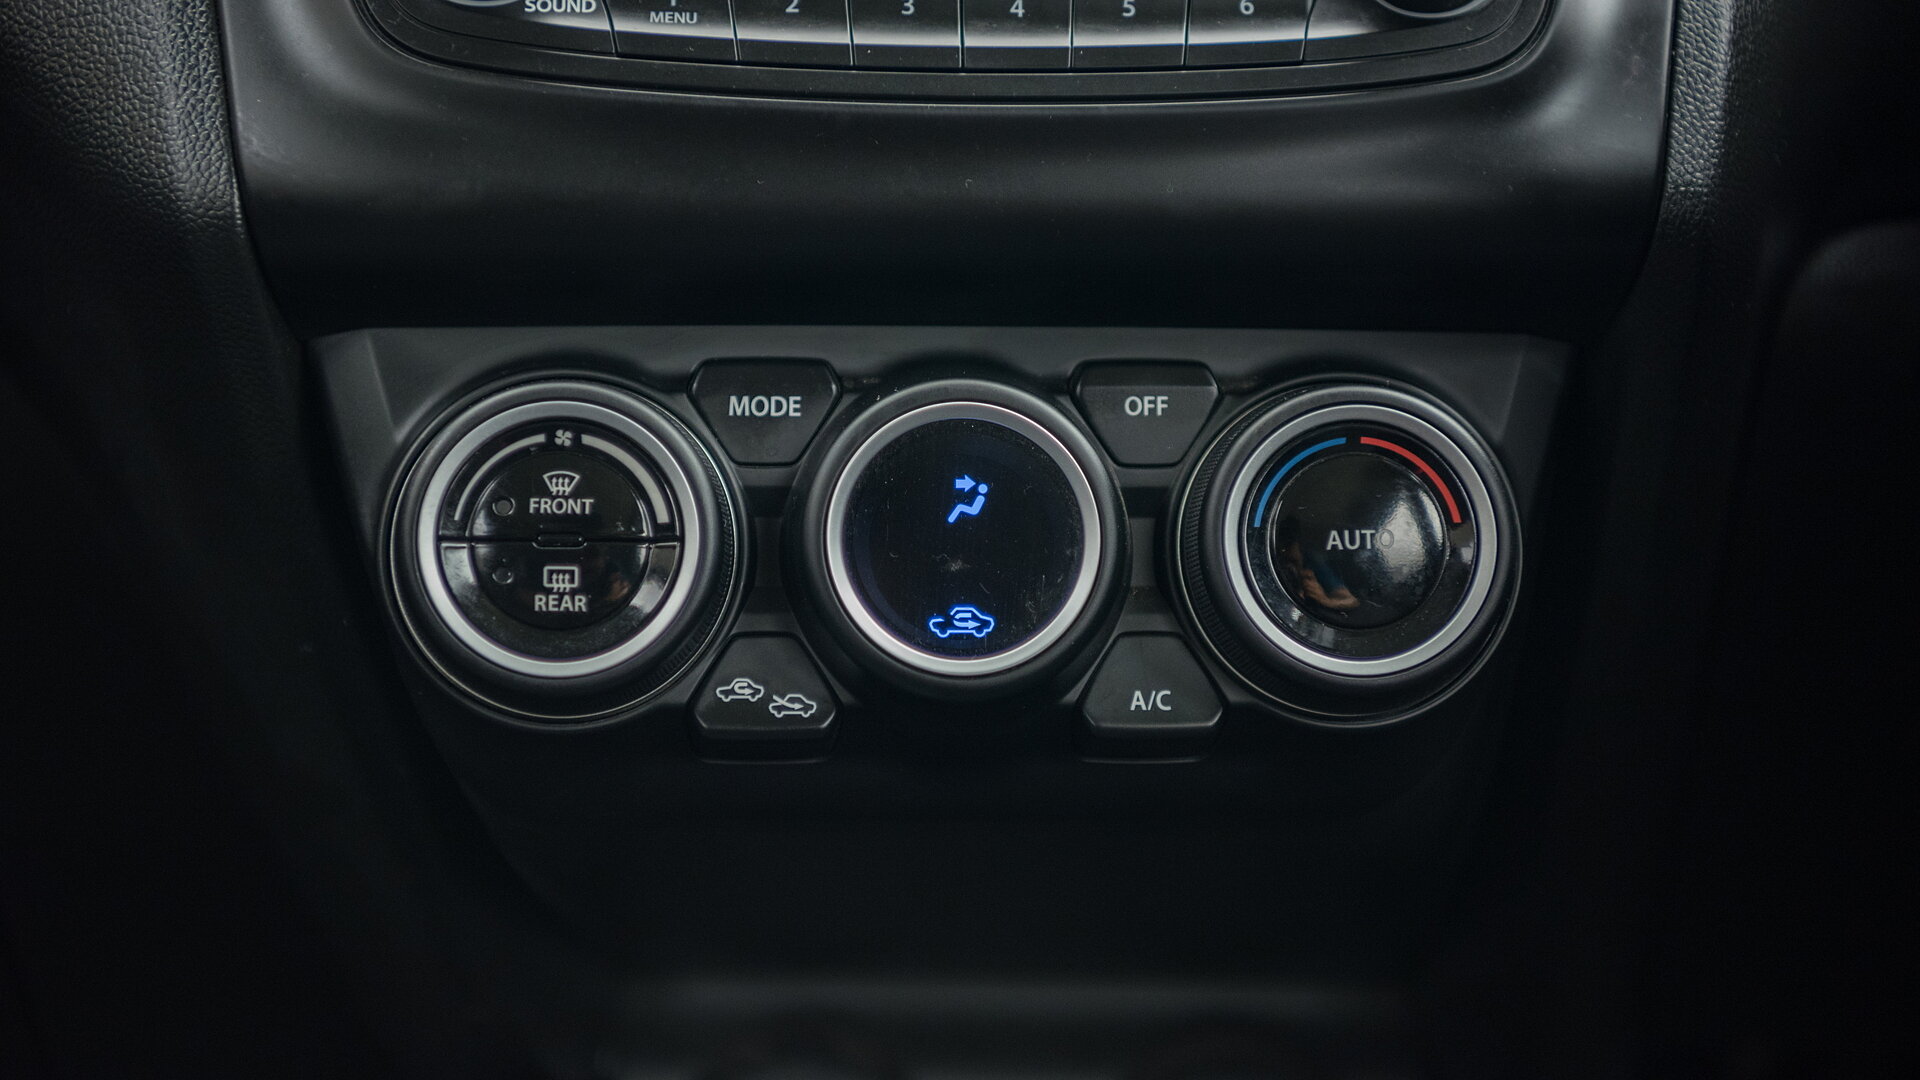 Swift AC Controls Image, Swift Photos in India - CarWale